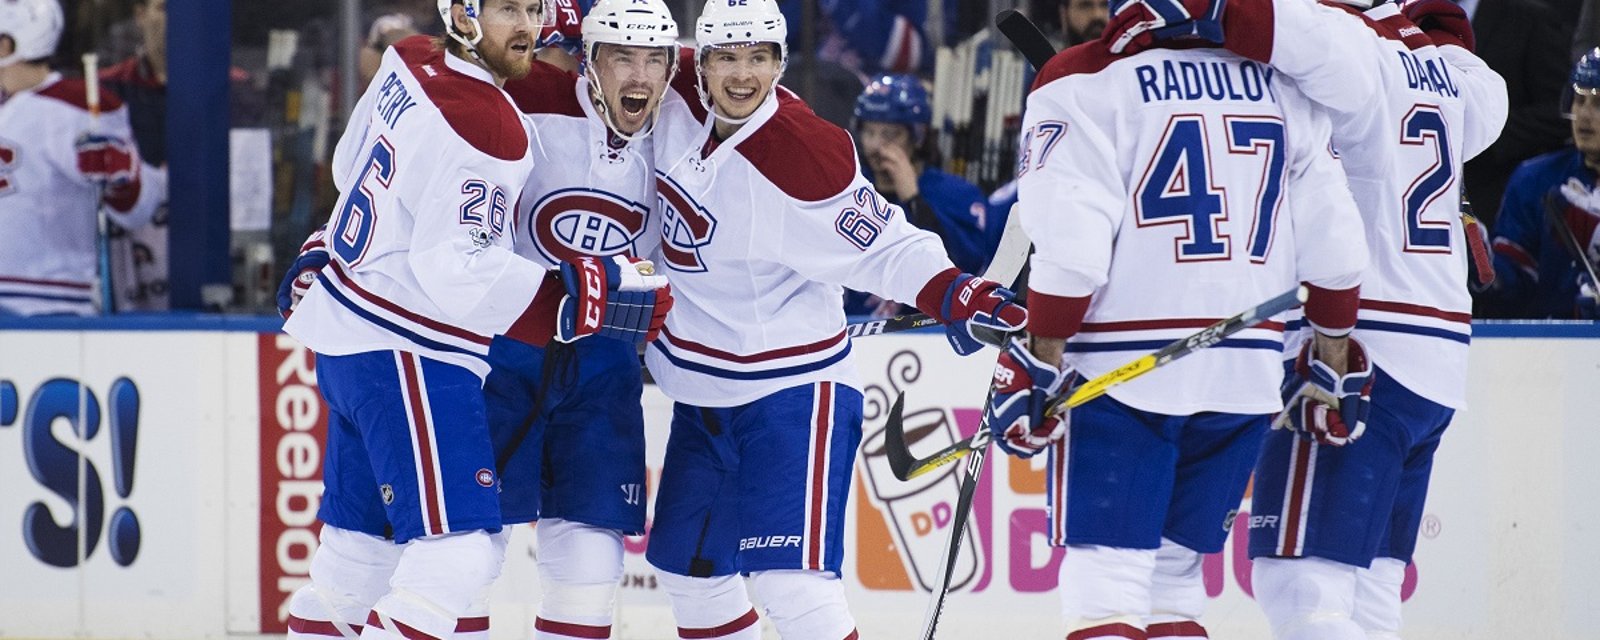 Report: Habs confirm defenseman has had surgery, long road to recovery.